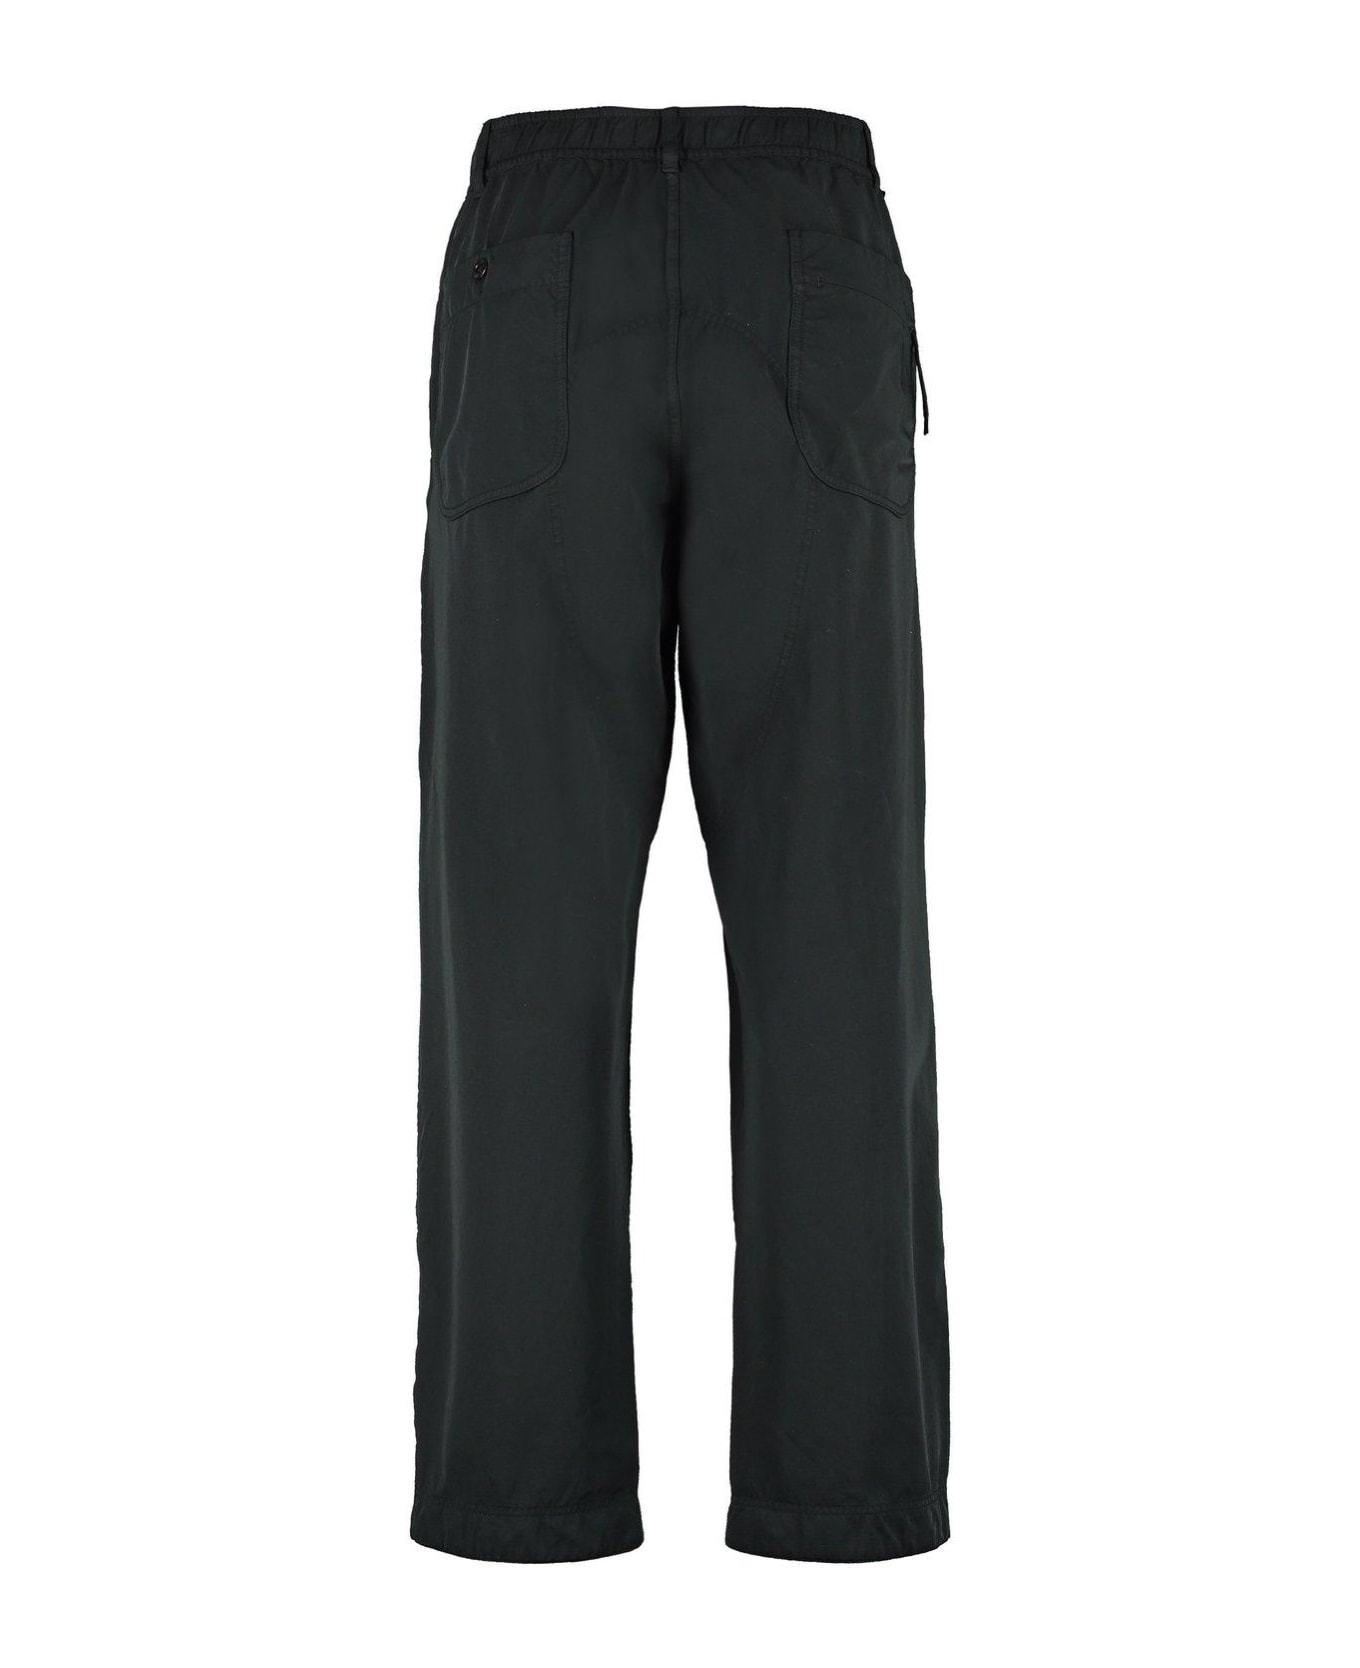 Stone Island Shadow Project Wide-leg Tailored Pants - BLACK ボトムス